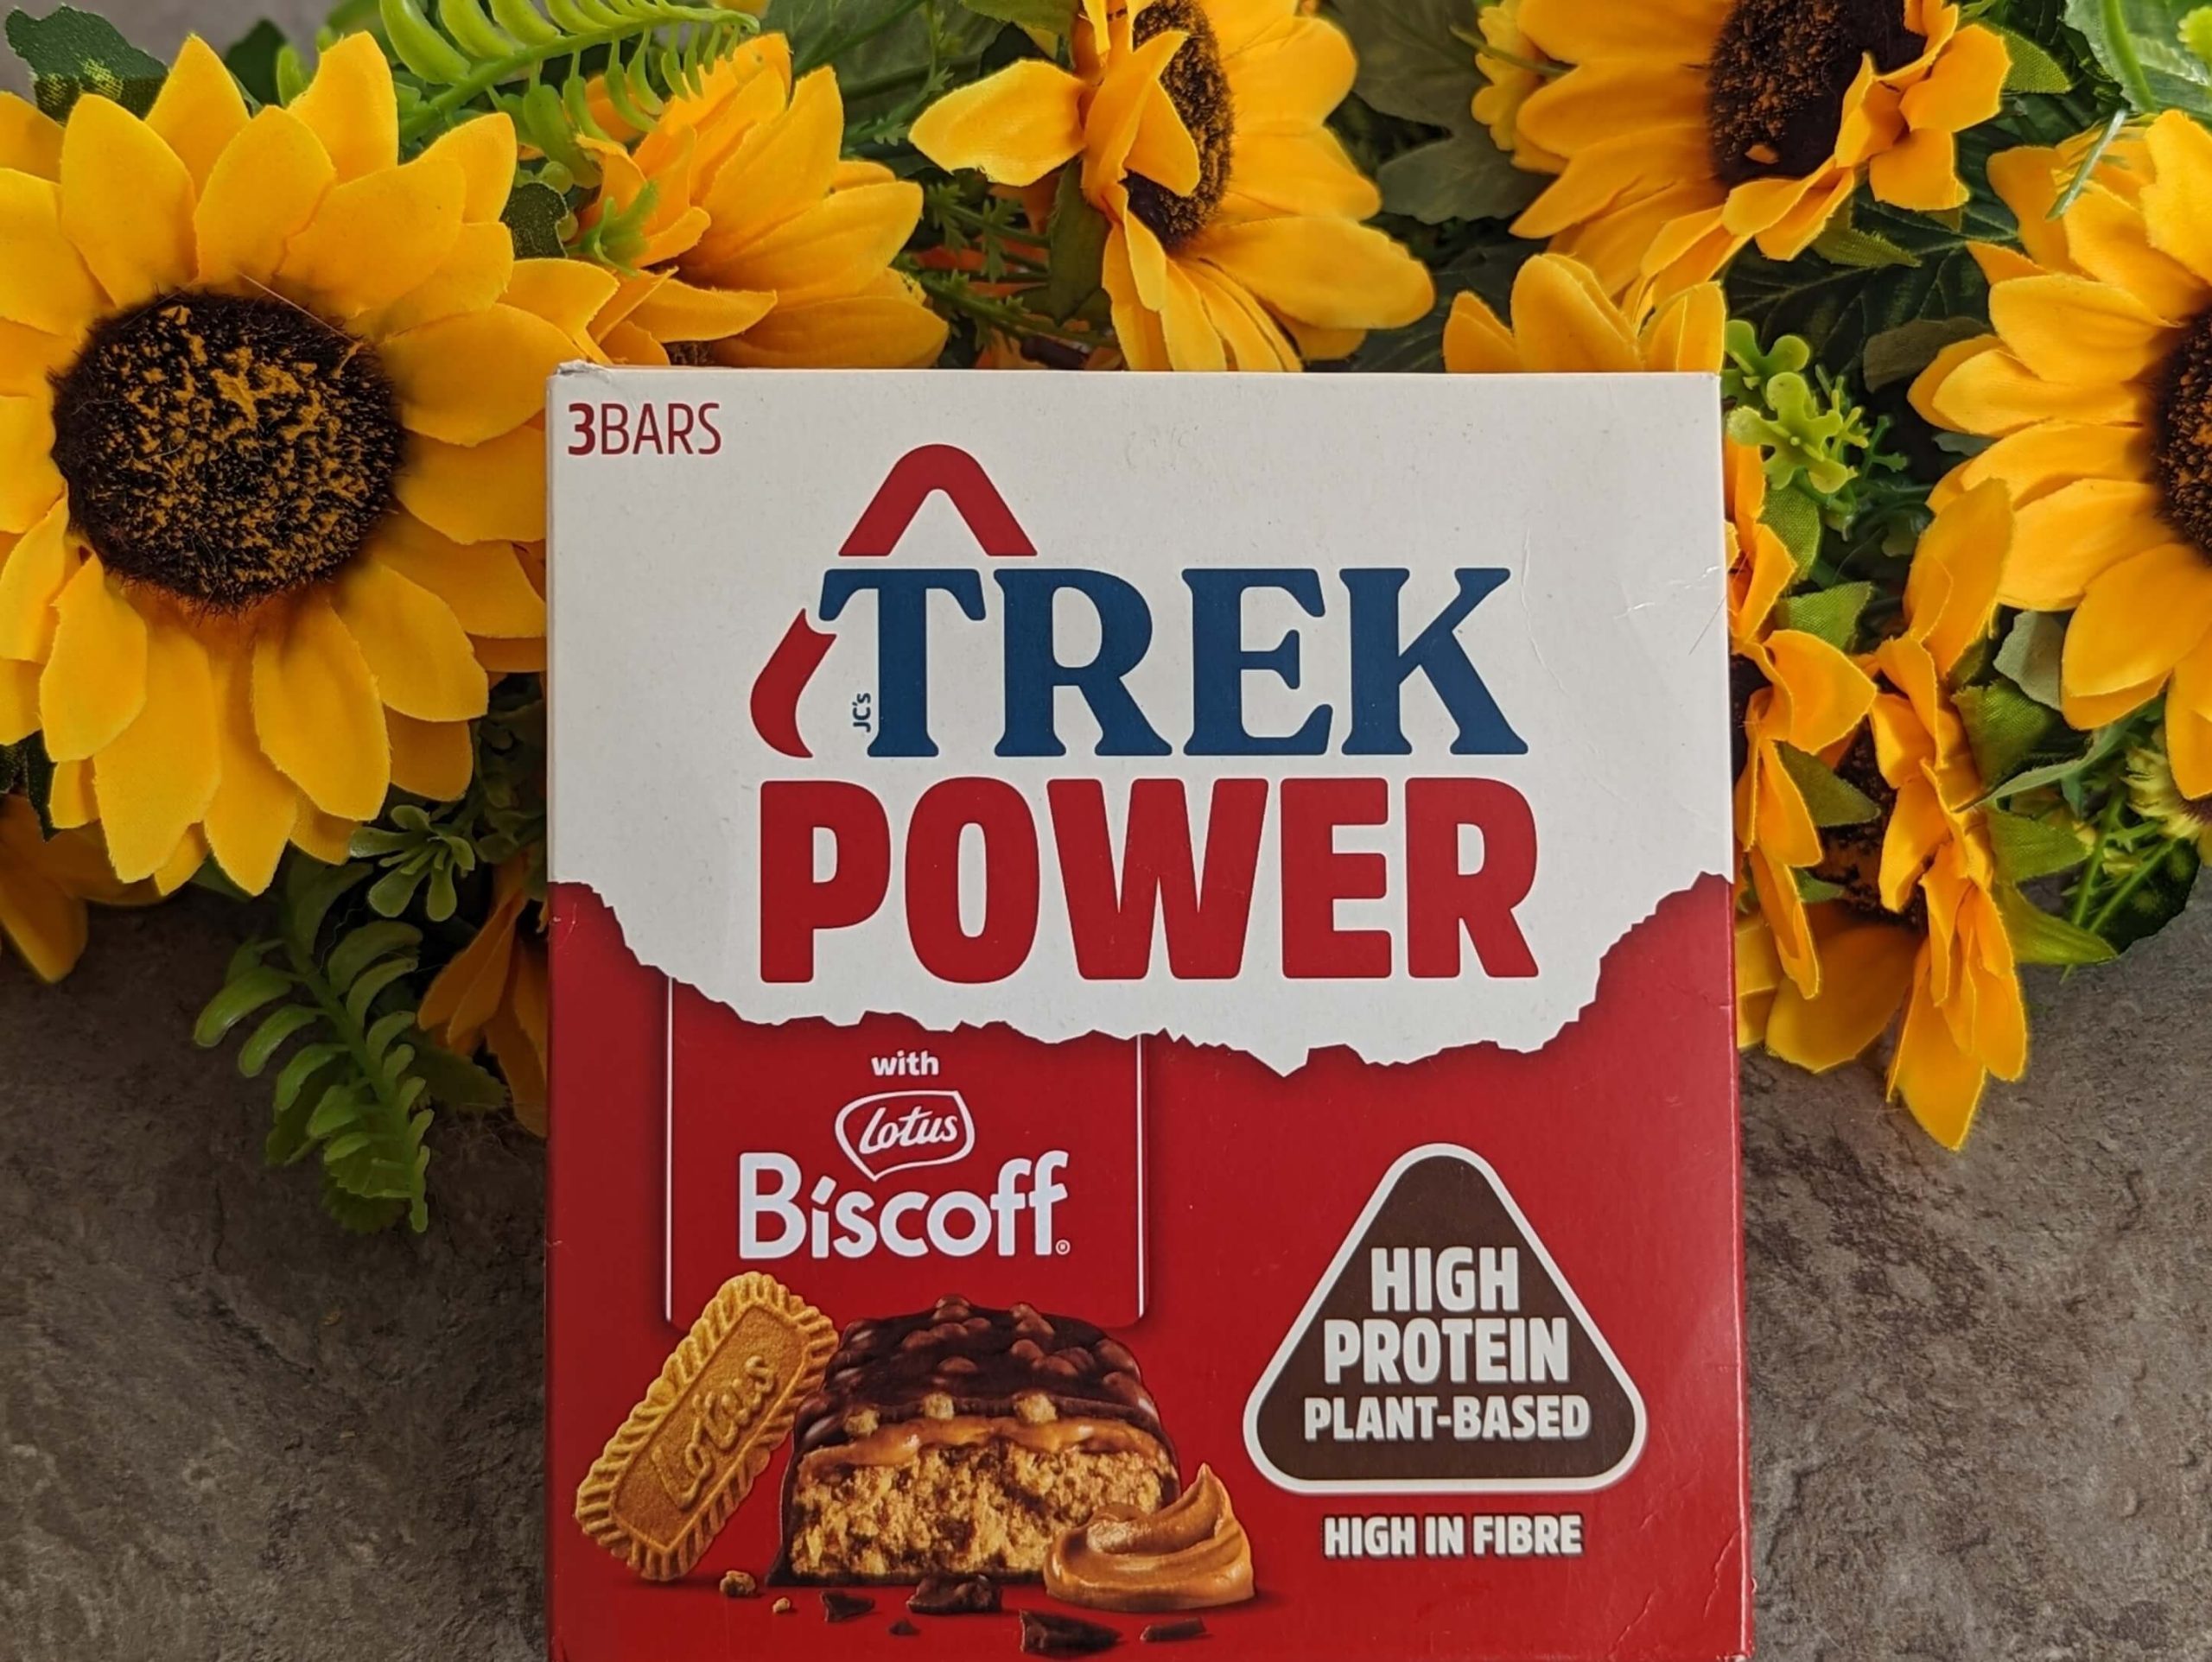 Box of Biscoff flavour vegan protein Trek Power bars displayed against a bunch of sunflowers.